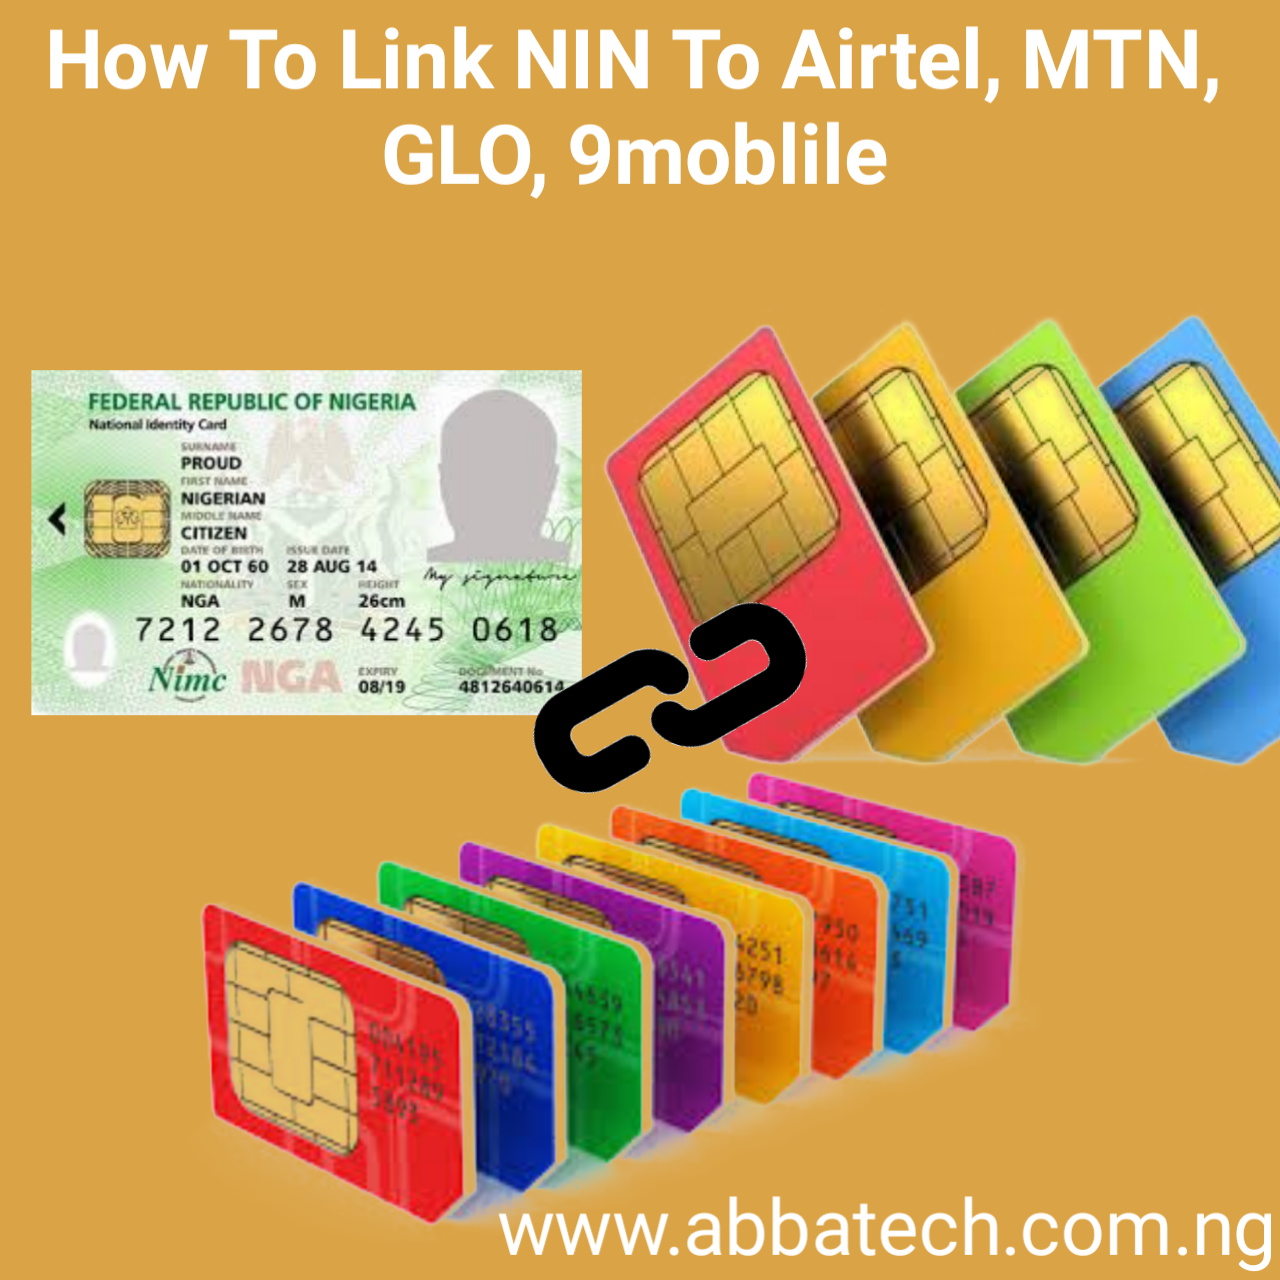 How to link NIN to airtel, MTN, GLO and 9mobile